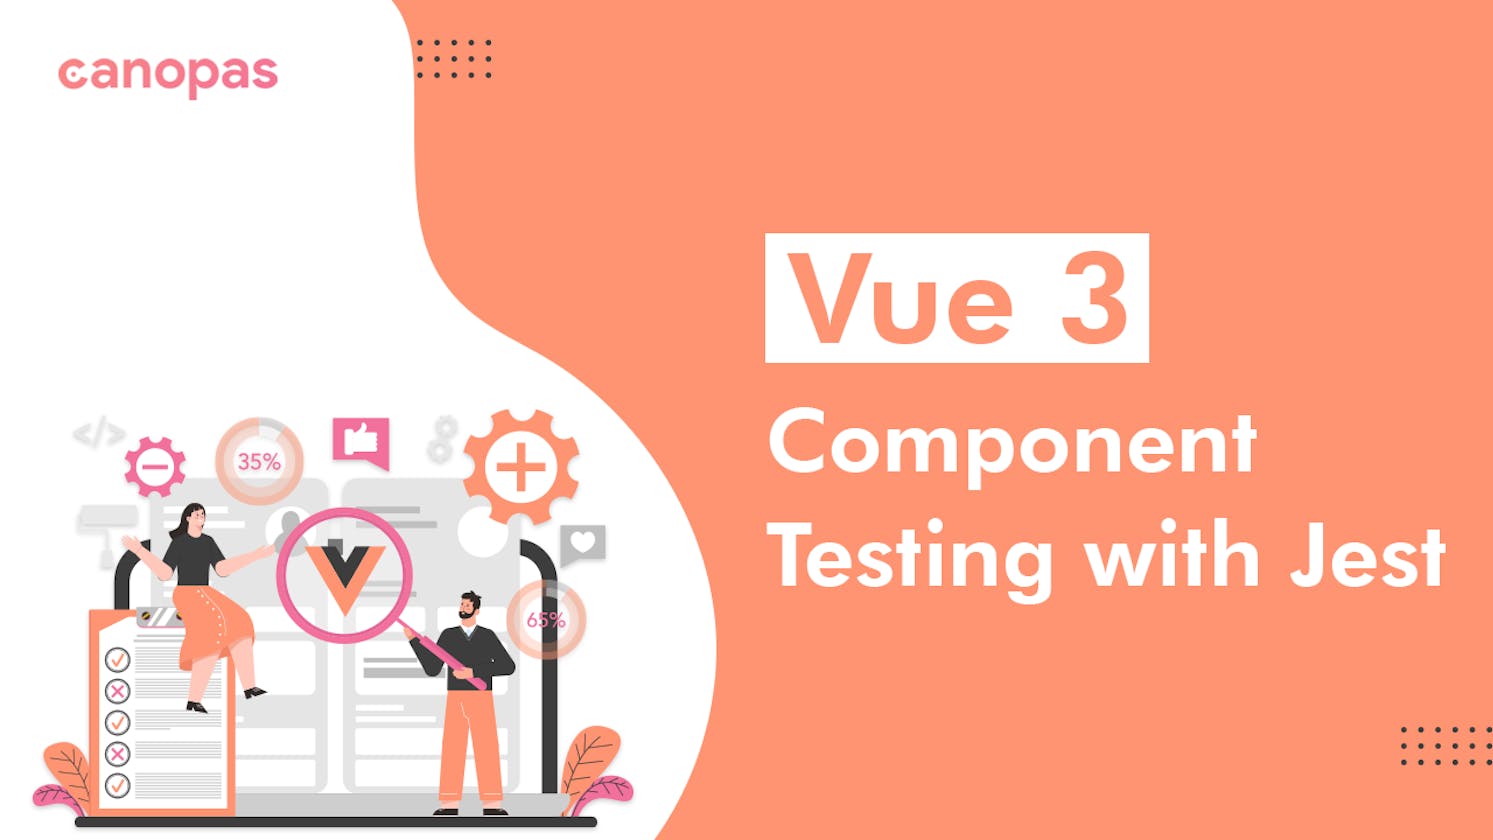 How to test Vue 3 components with Jest?